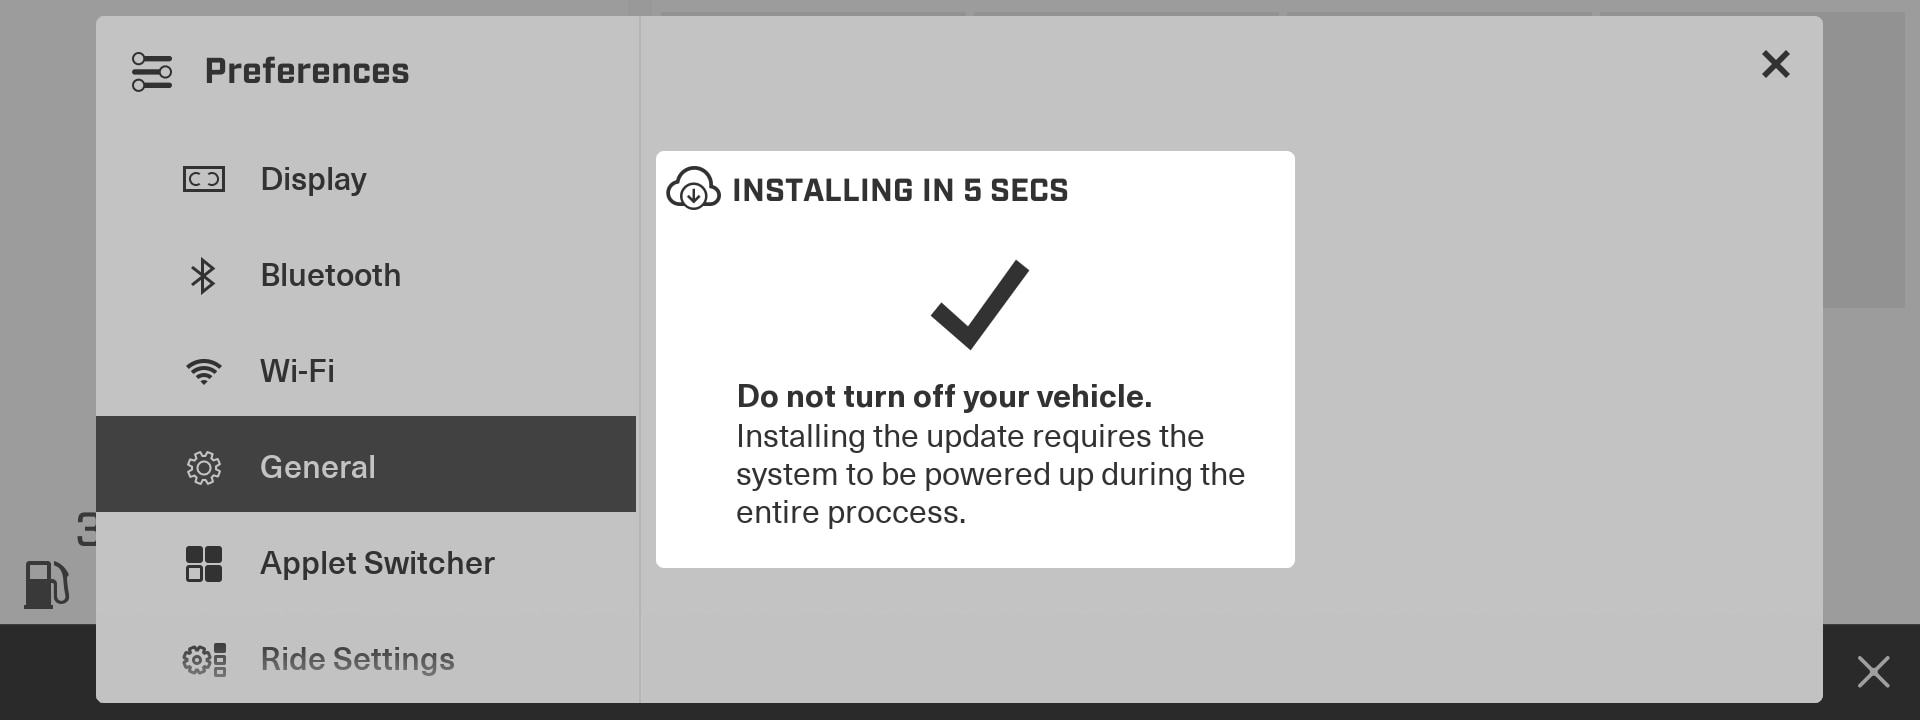 Do not turn off the vehicle during the installation